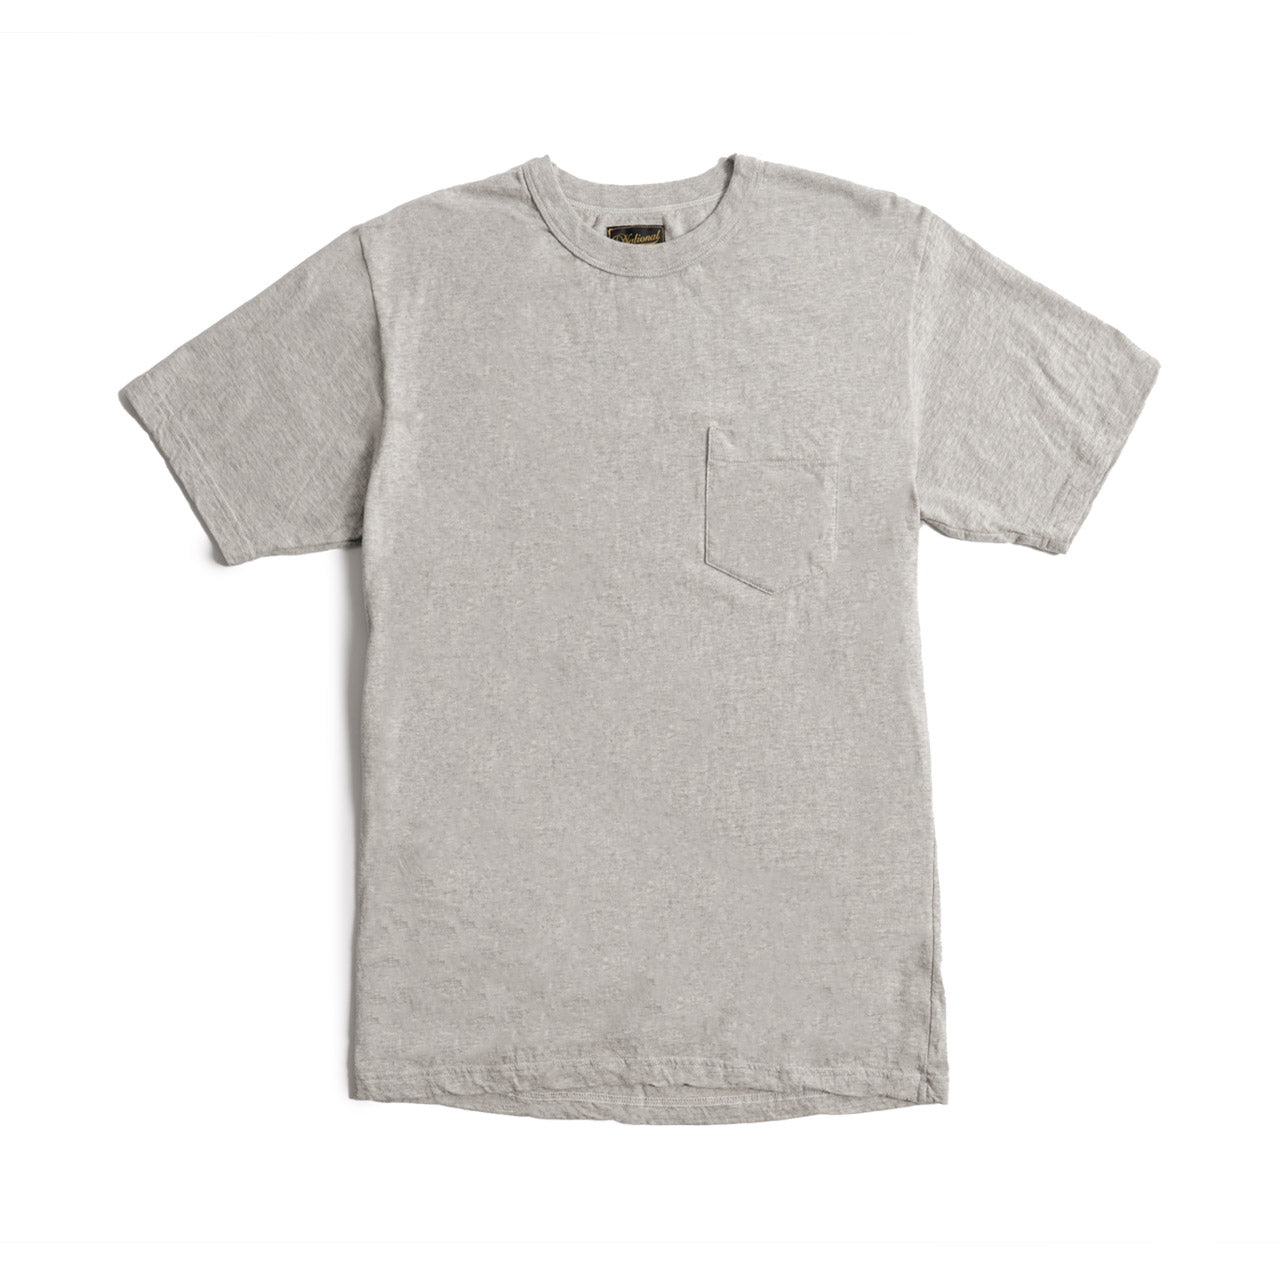 National Athletic Goods Pocket Tee